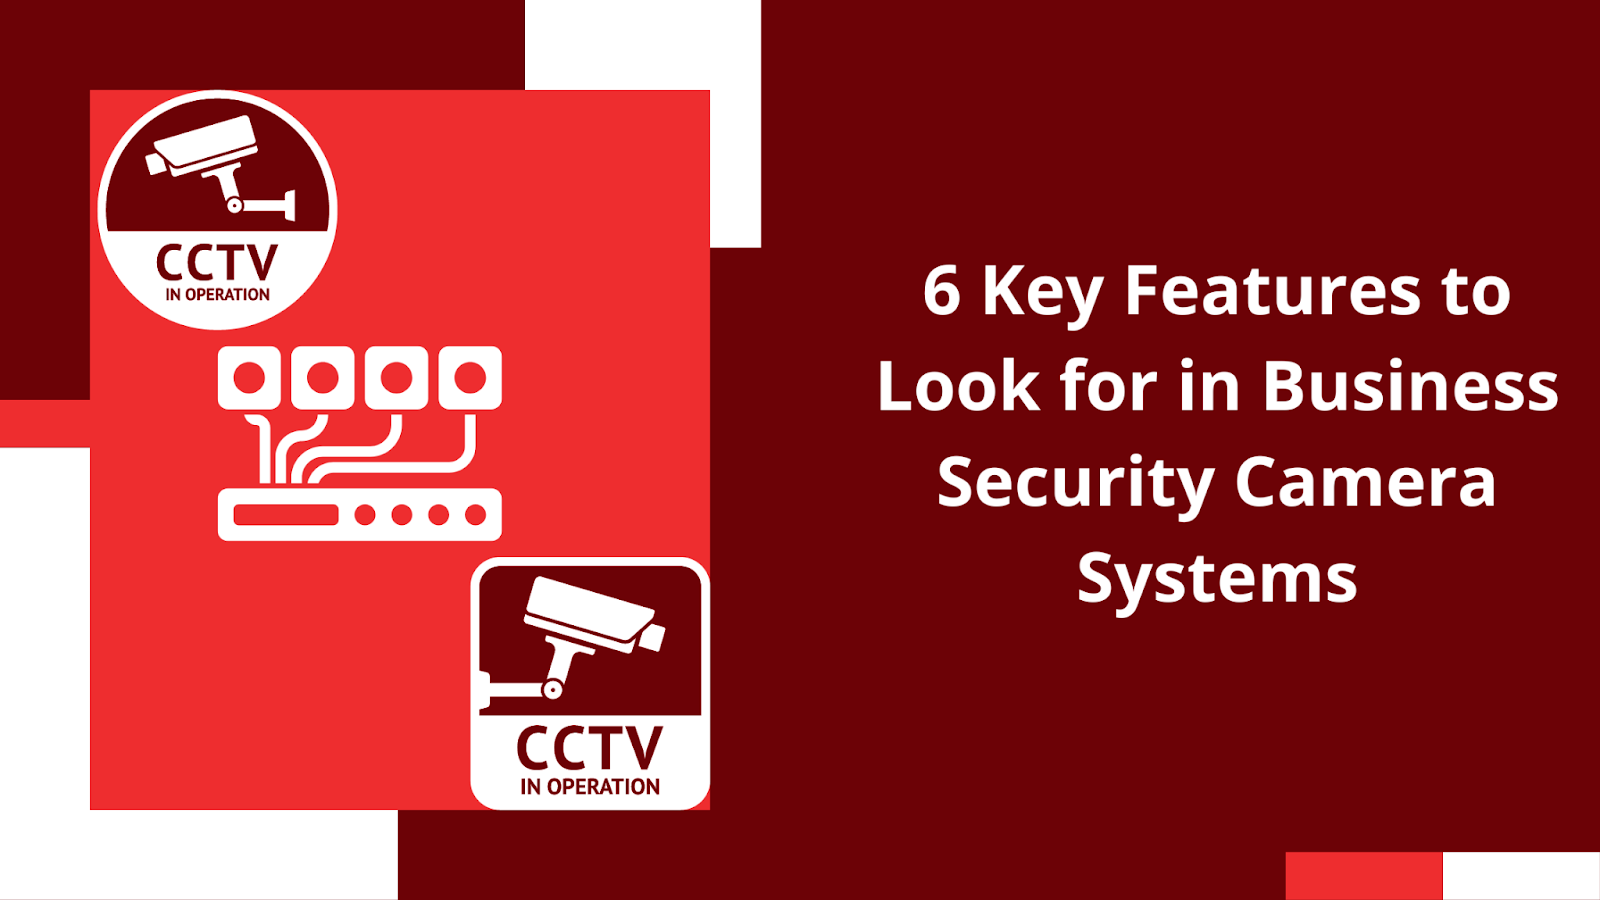 6 Key Features to Look for in Business Security Camera Systems